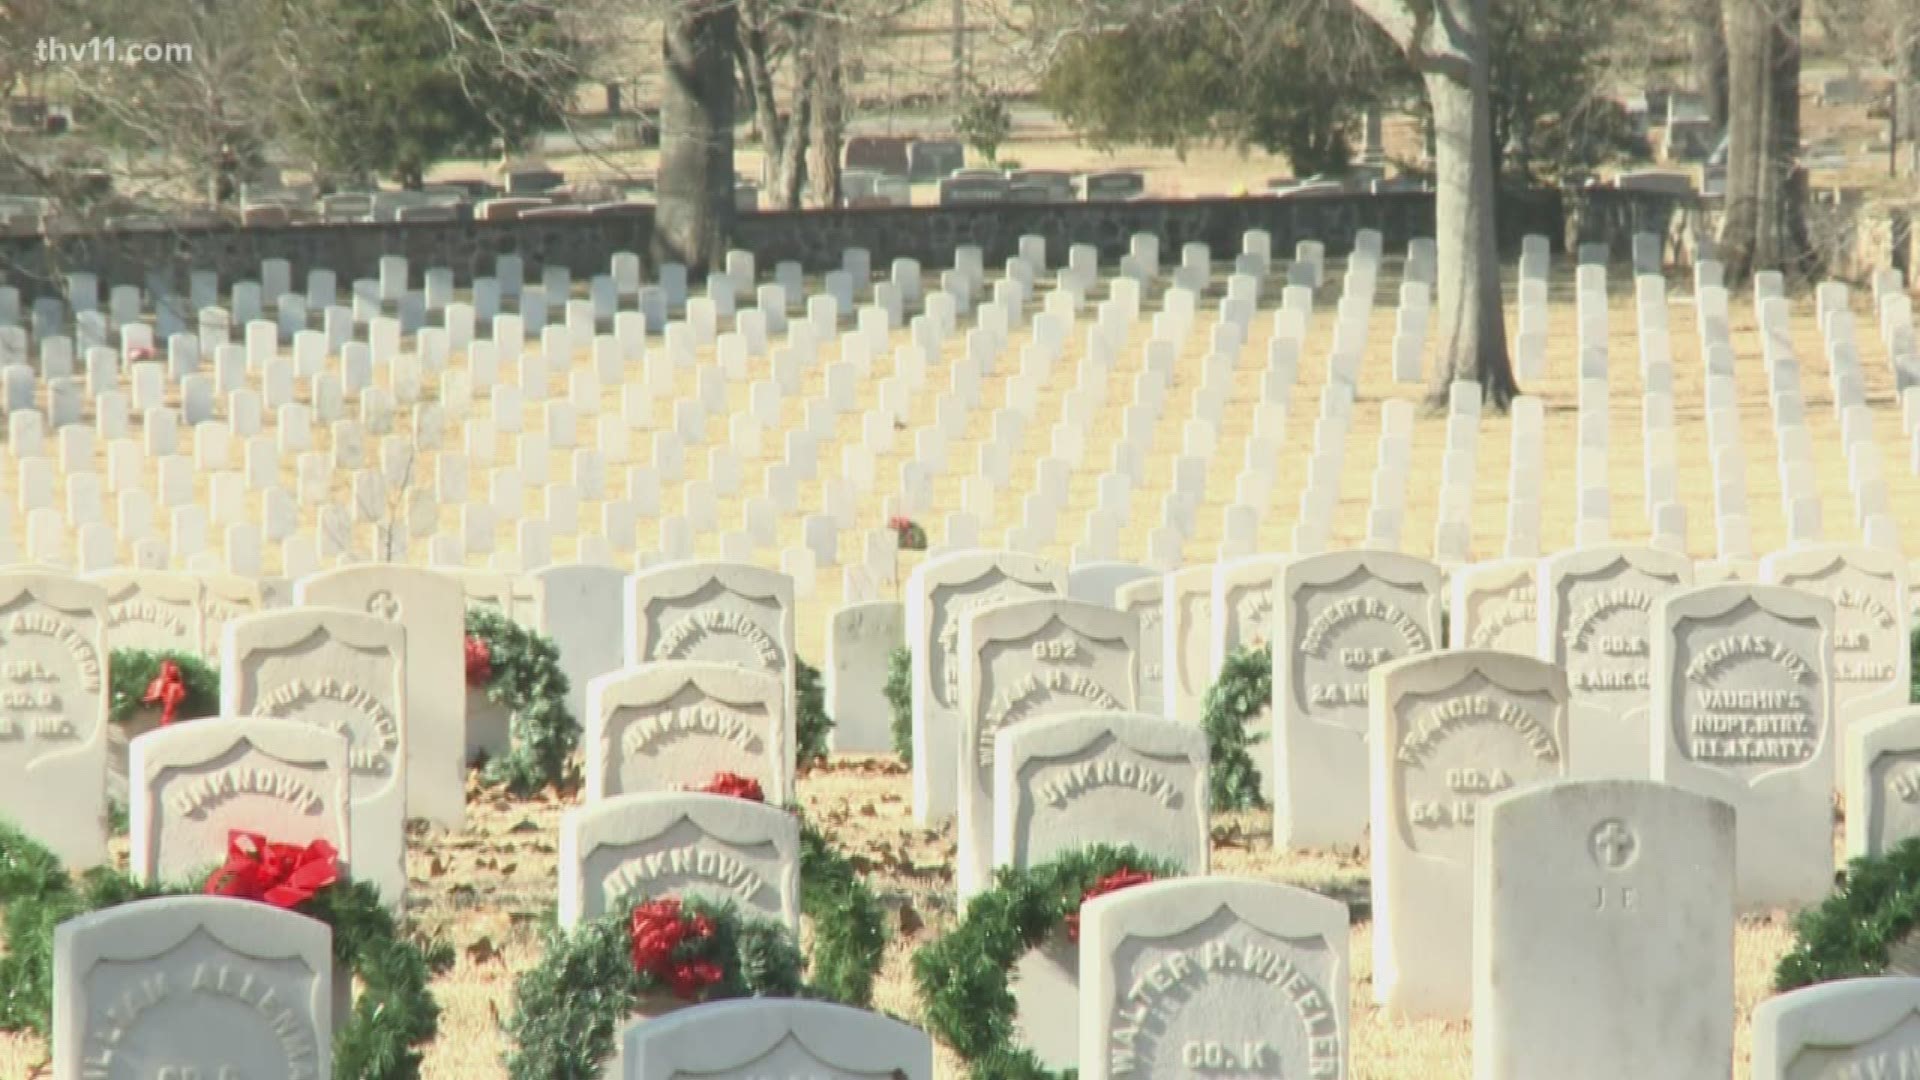 Arkansas Run for the Fallen didn't get as many donations as they did last year for the wreaths, but they're hoping to still bring in lots of volunteers.